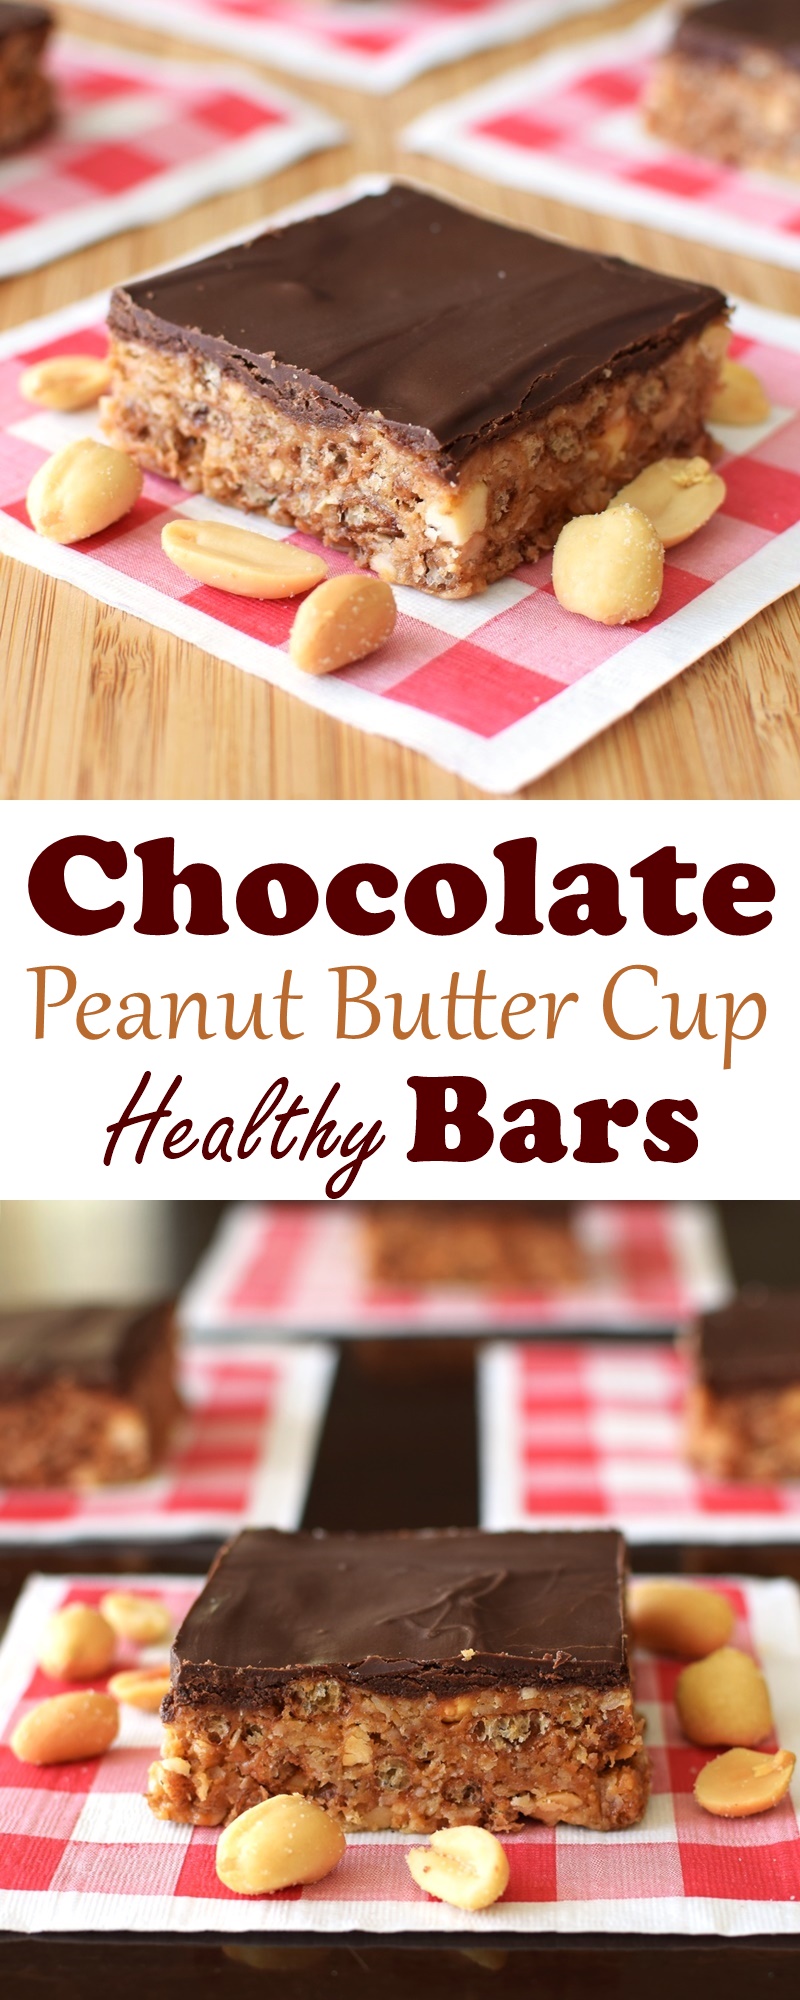 Healthy Chocolate Peanut Butter Cup Bars - Dairy-Free, Gluten-Free, Vegan Optional